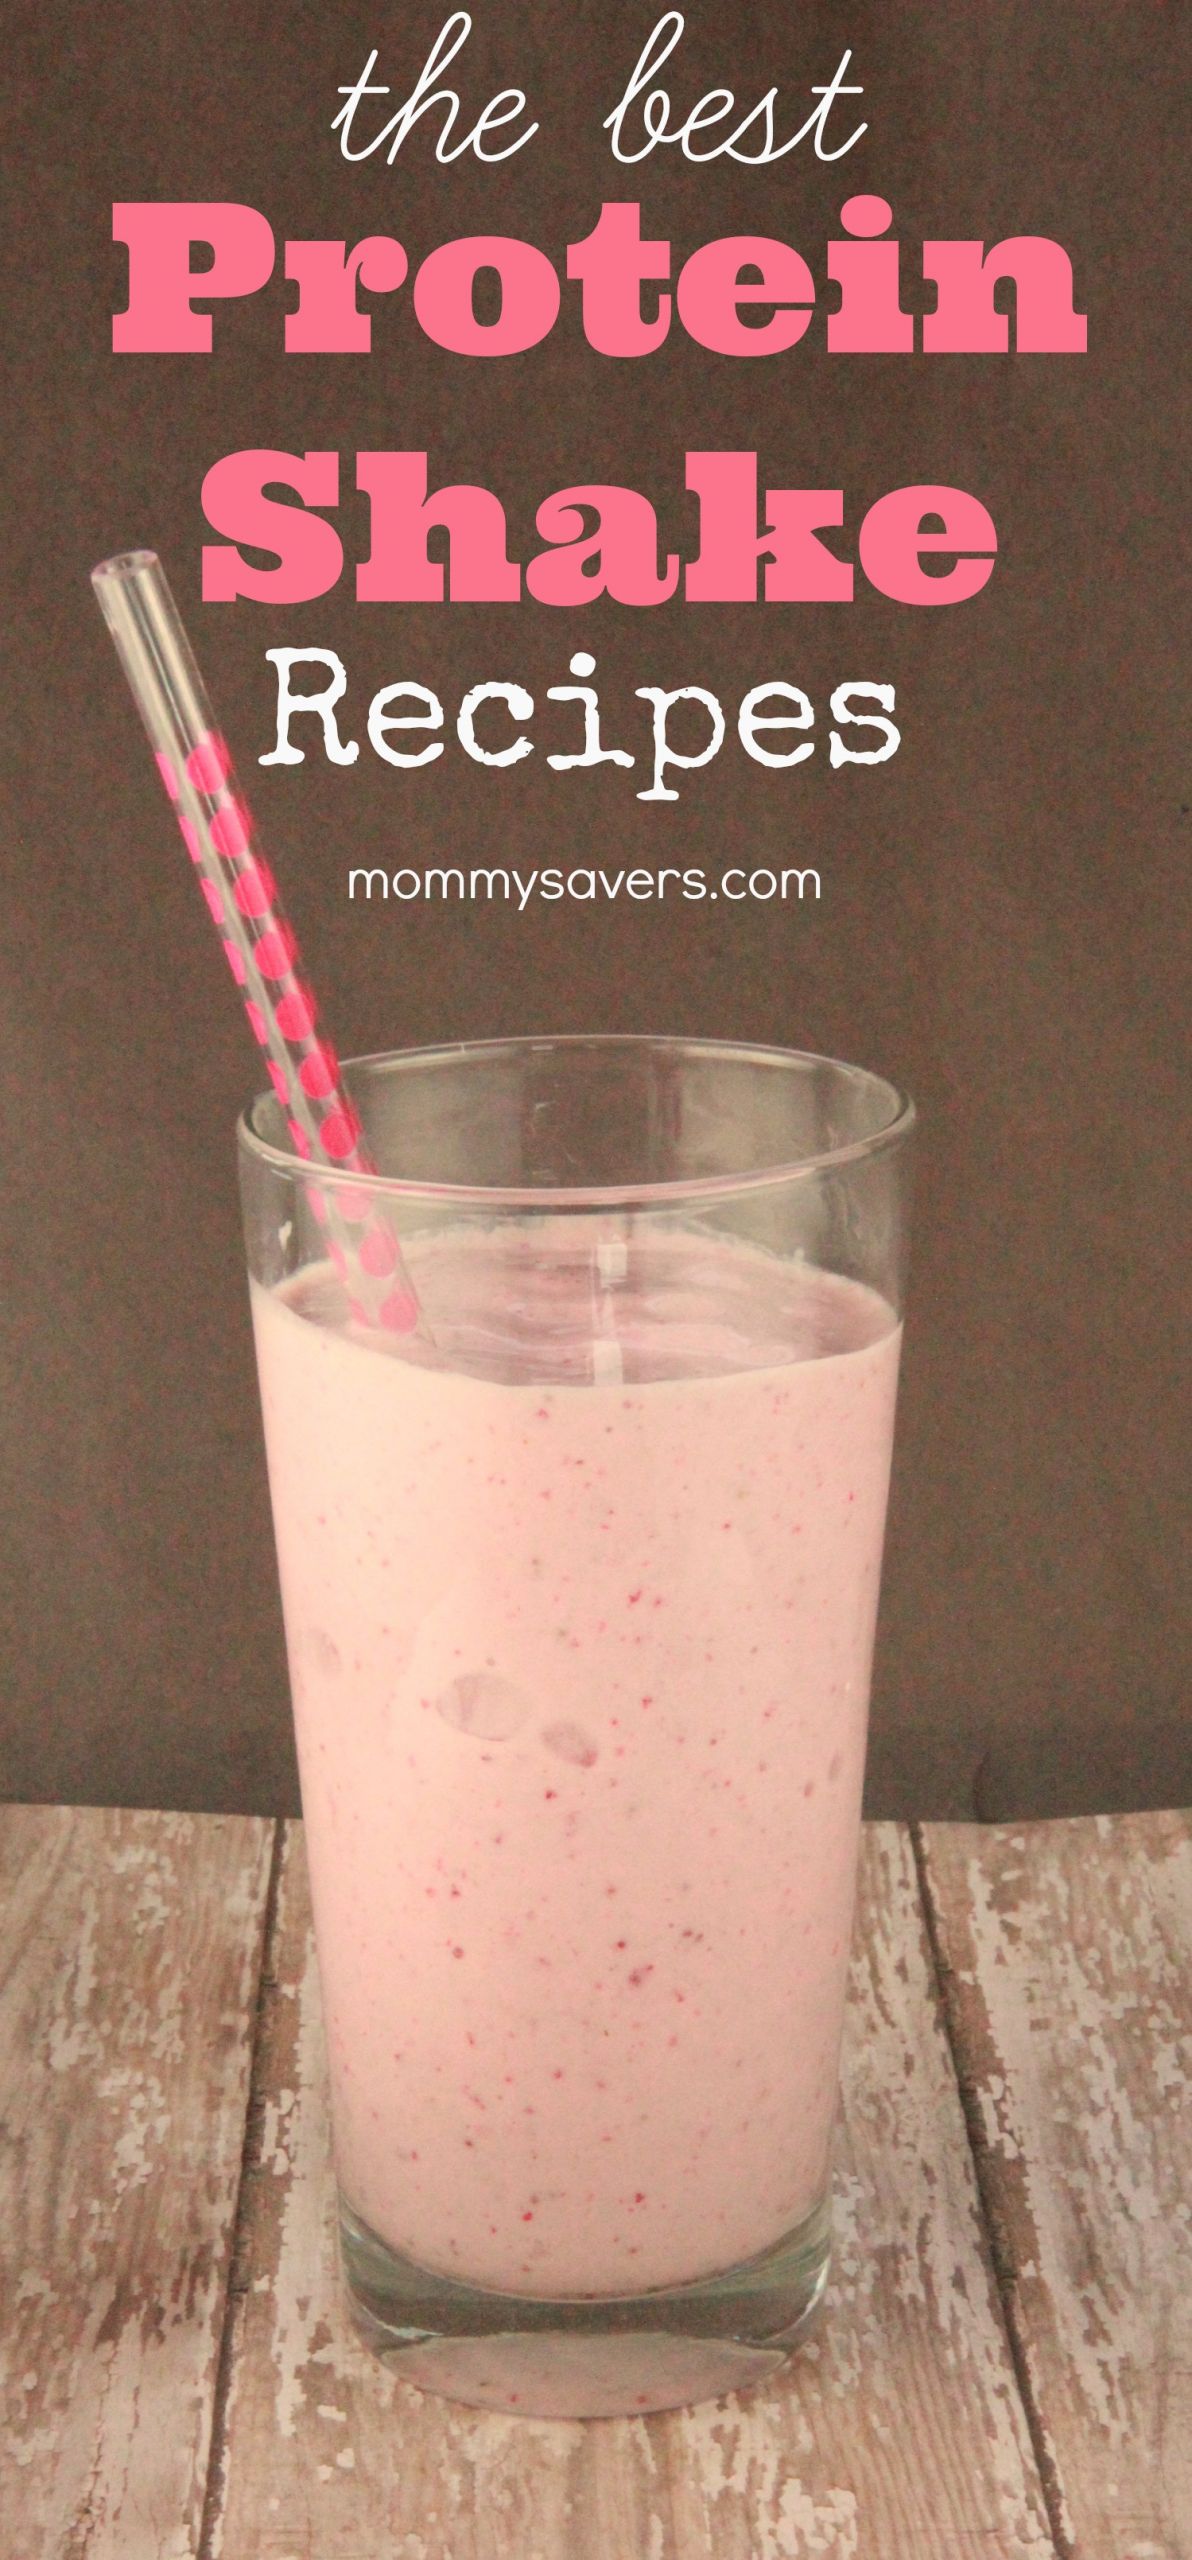 Best Protein Shake Recipes For Weight Loss
 Best Protein Shake Recipes Mommysavers